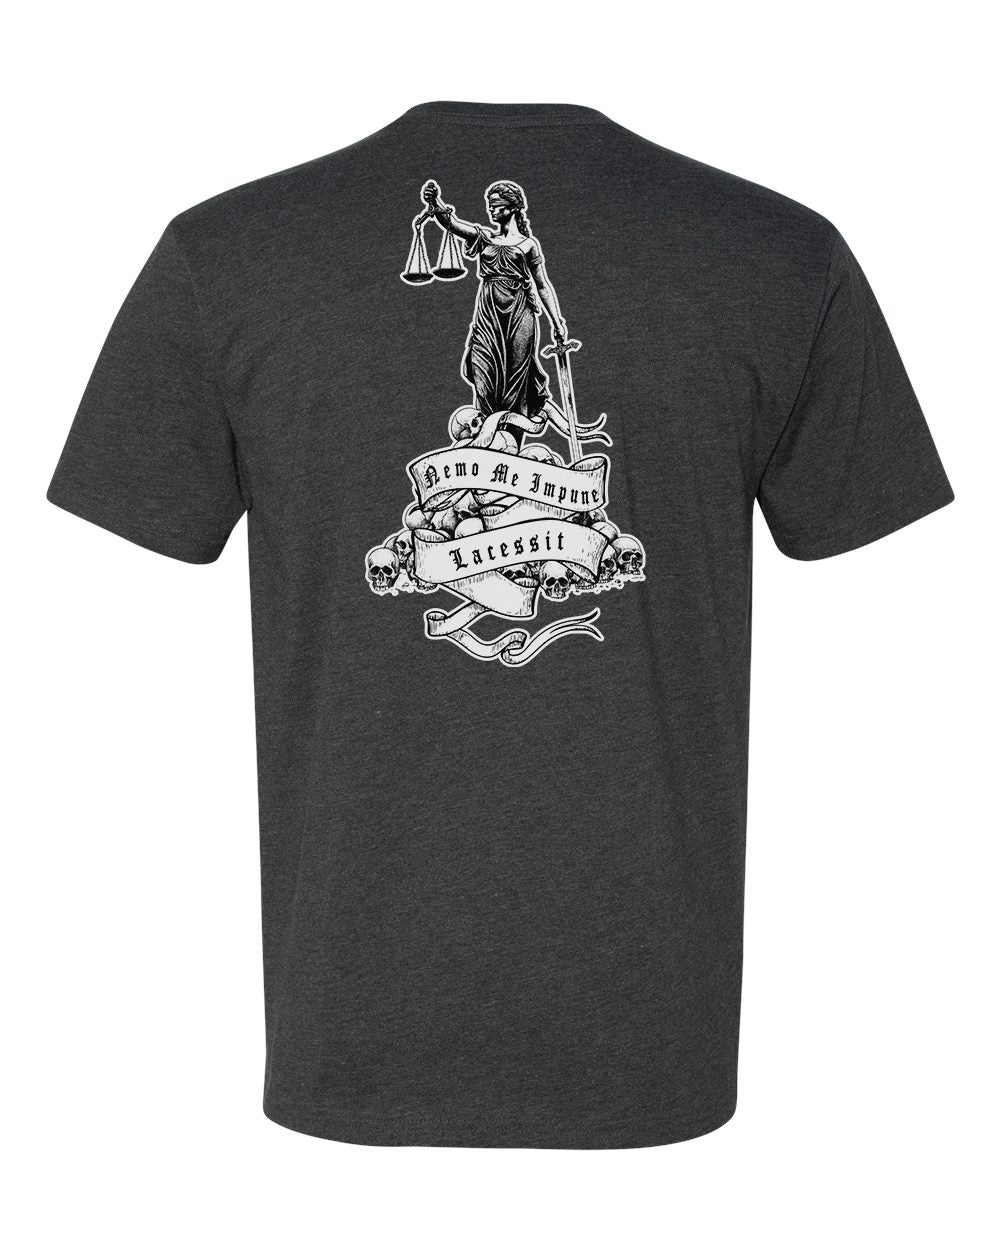 Lady Justice Tee